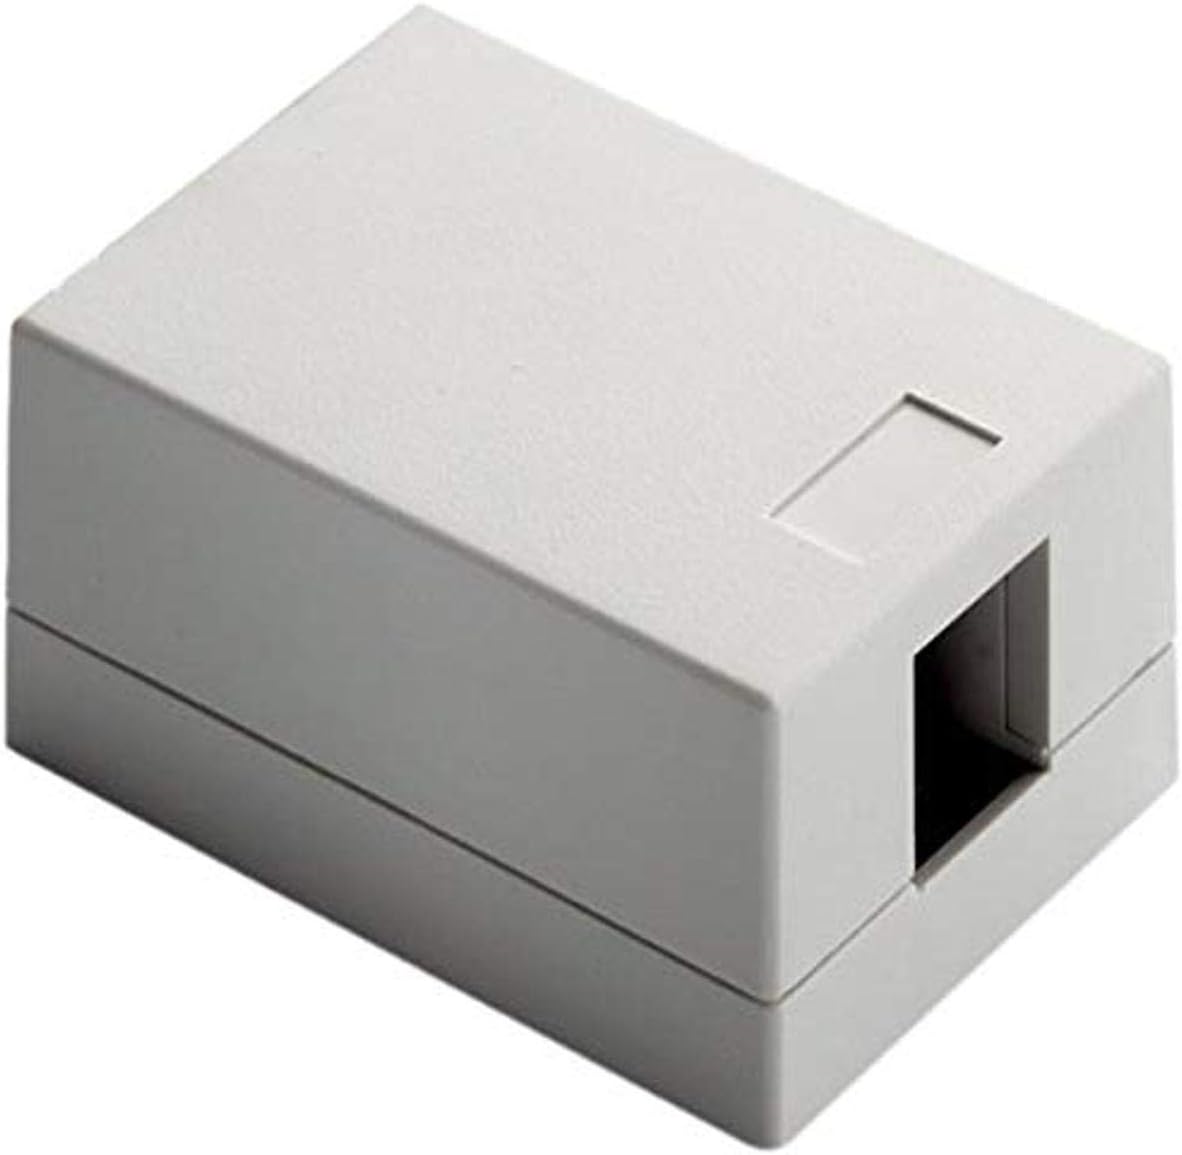 PASS WP3501-WH ONE PORT SURFACE MNT BOX WH (M10)